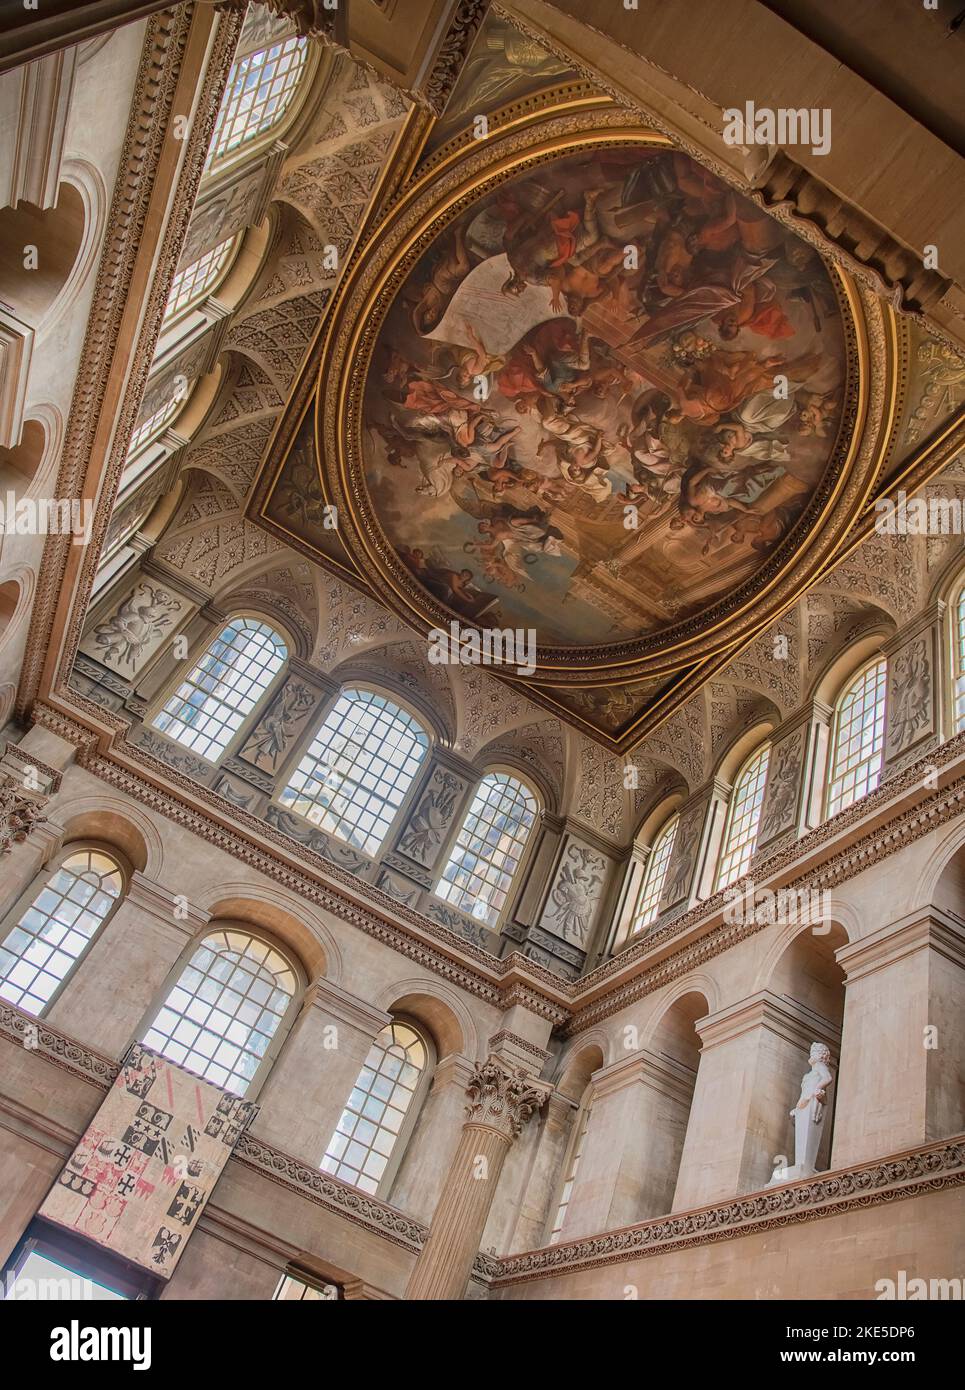 England, Oxfordshire, Woodstock, Blenheim Palace, The Great Hall featuring a painting from 1716 by Sir James Thornhill depicting the Duke of Marlborough kneeling to Britannia, proffering a plan of the Battle of Blenheim. Stock Photo